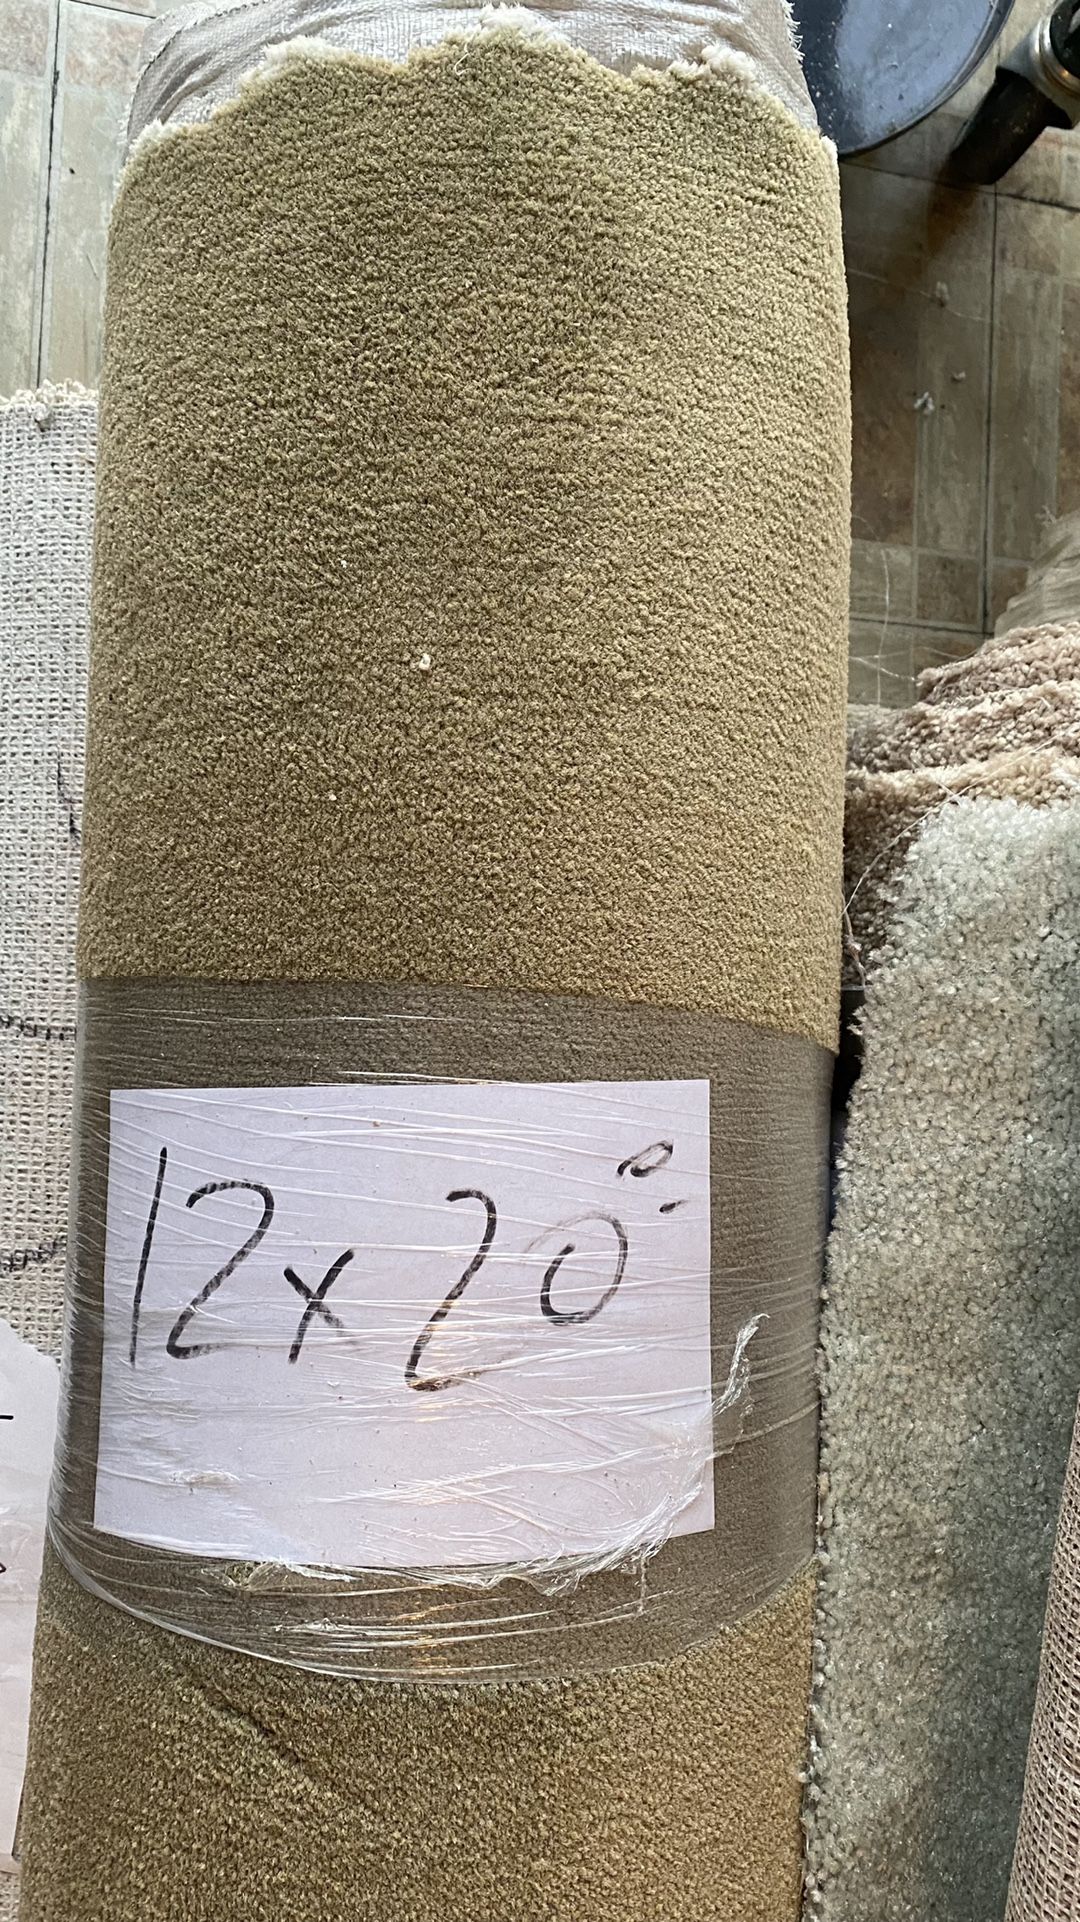 CARPET REMNANTS $49.00 Up $295.00 for Sale in Lake Worth, FL - OfferUp